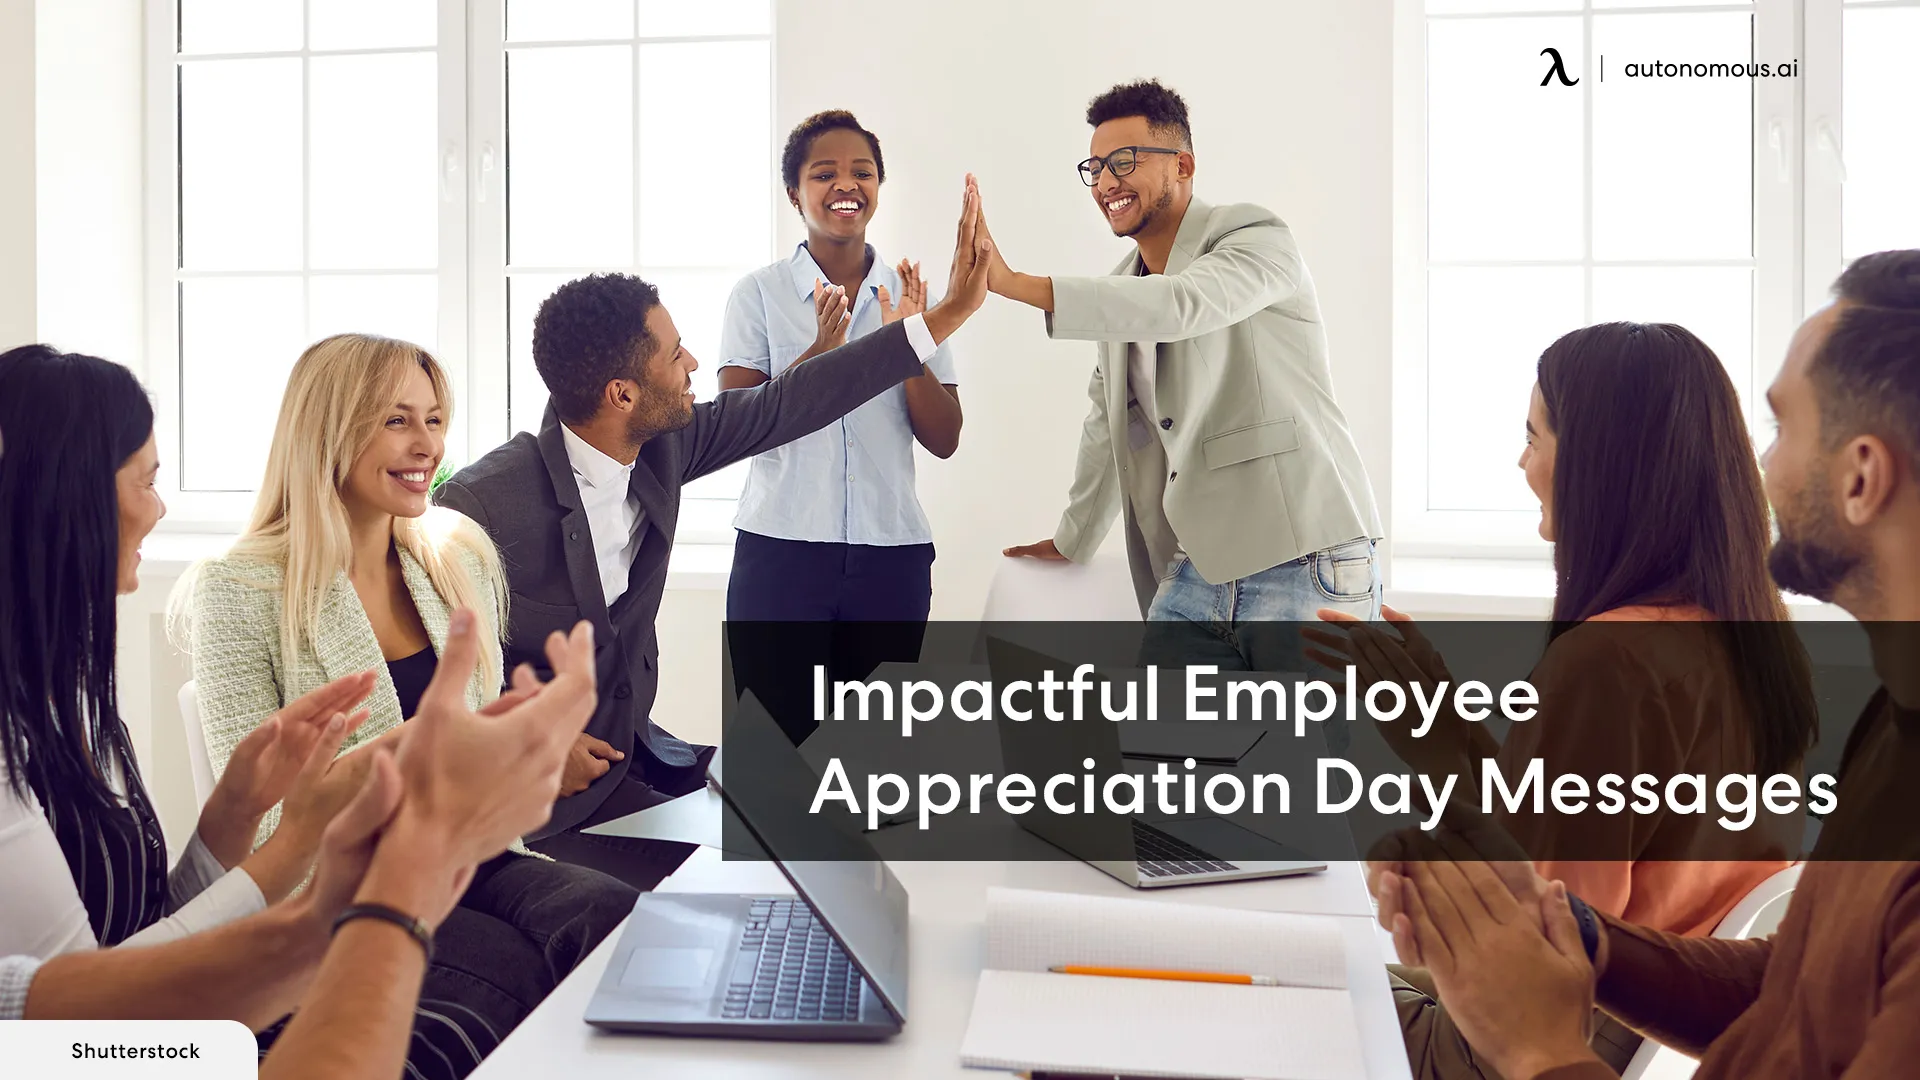 Happy Employee Appreciation Day Messages to Team